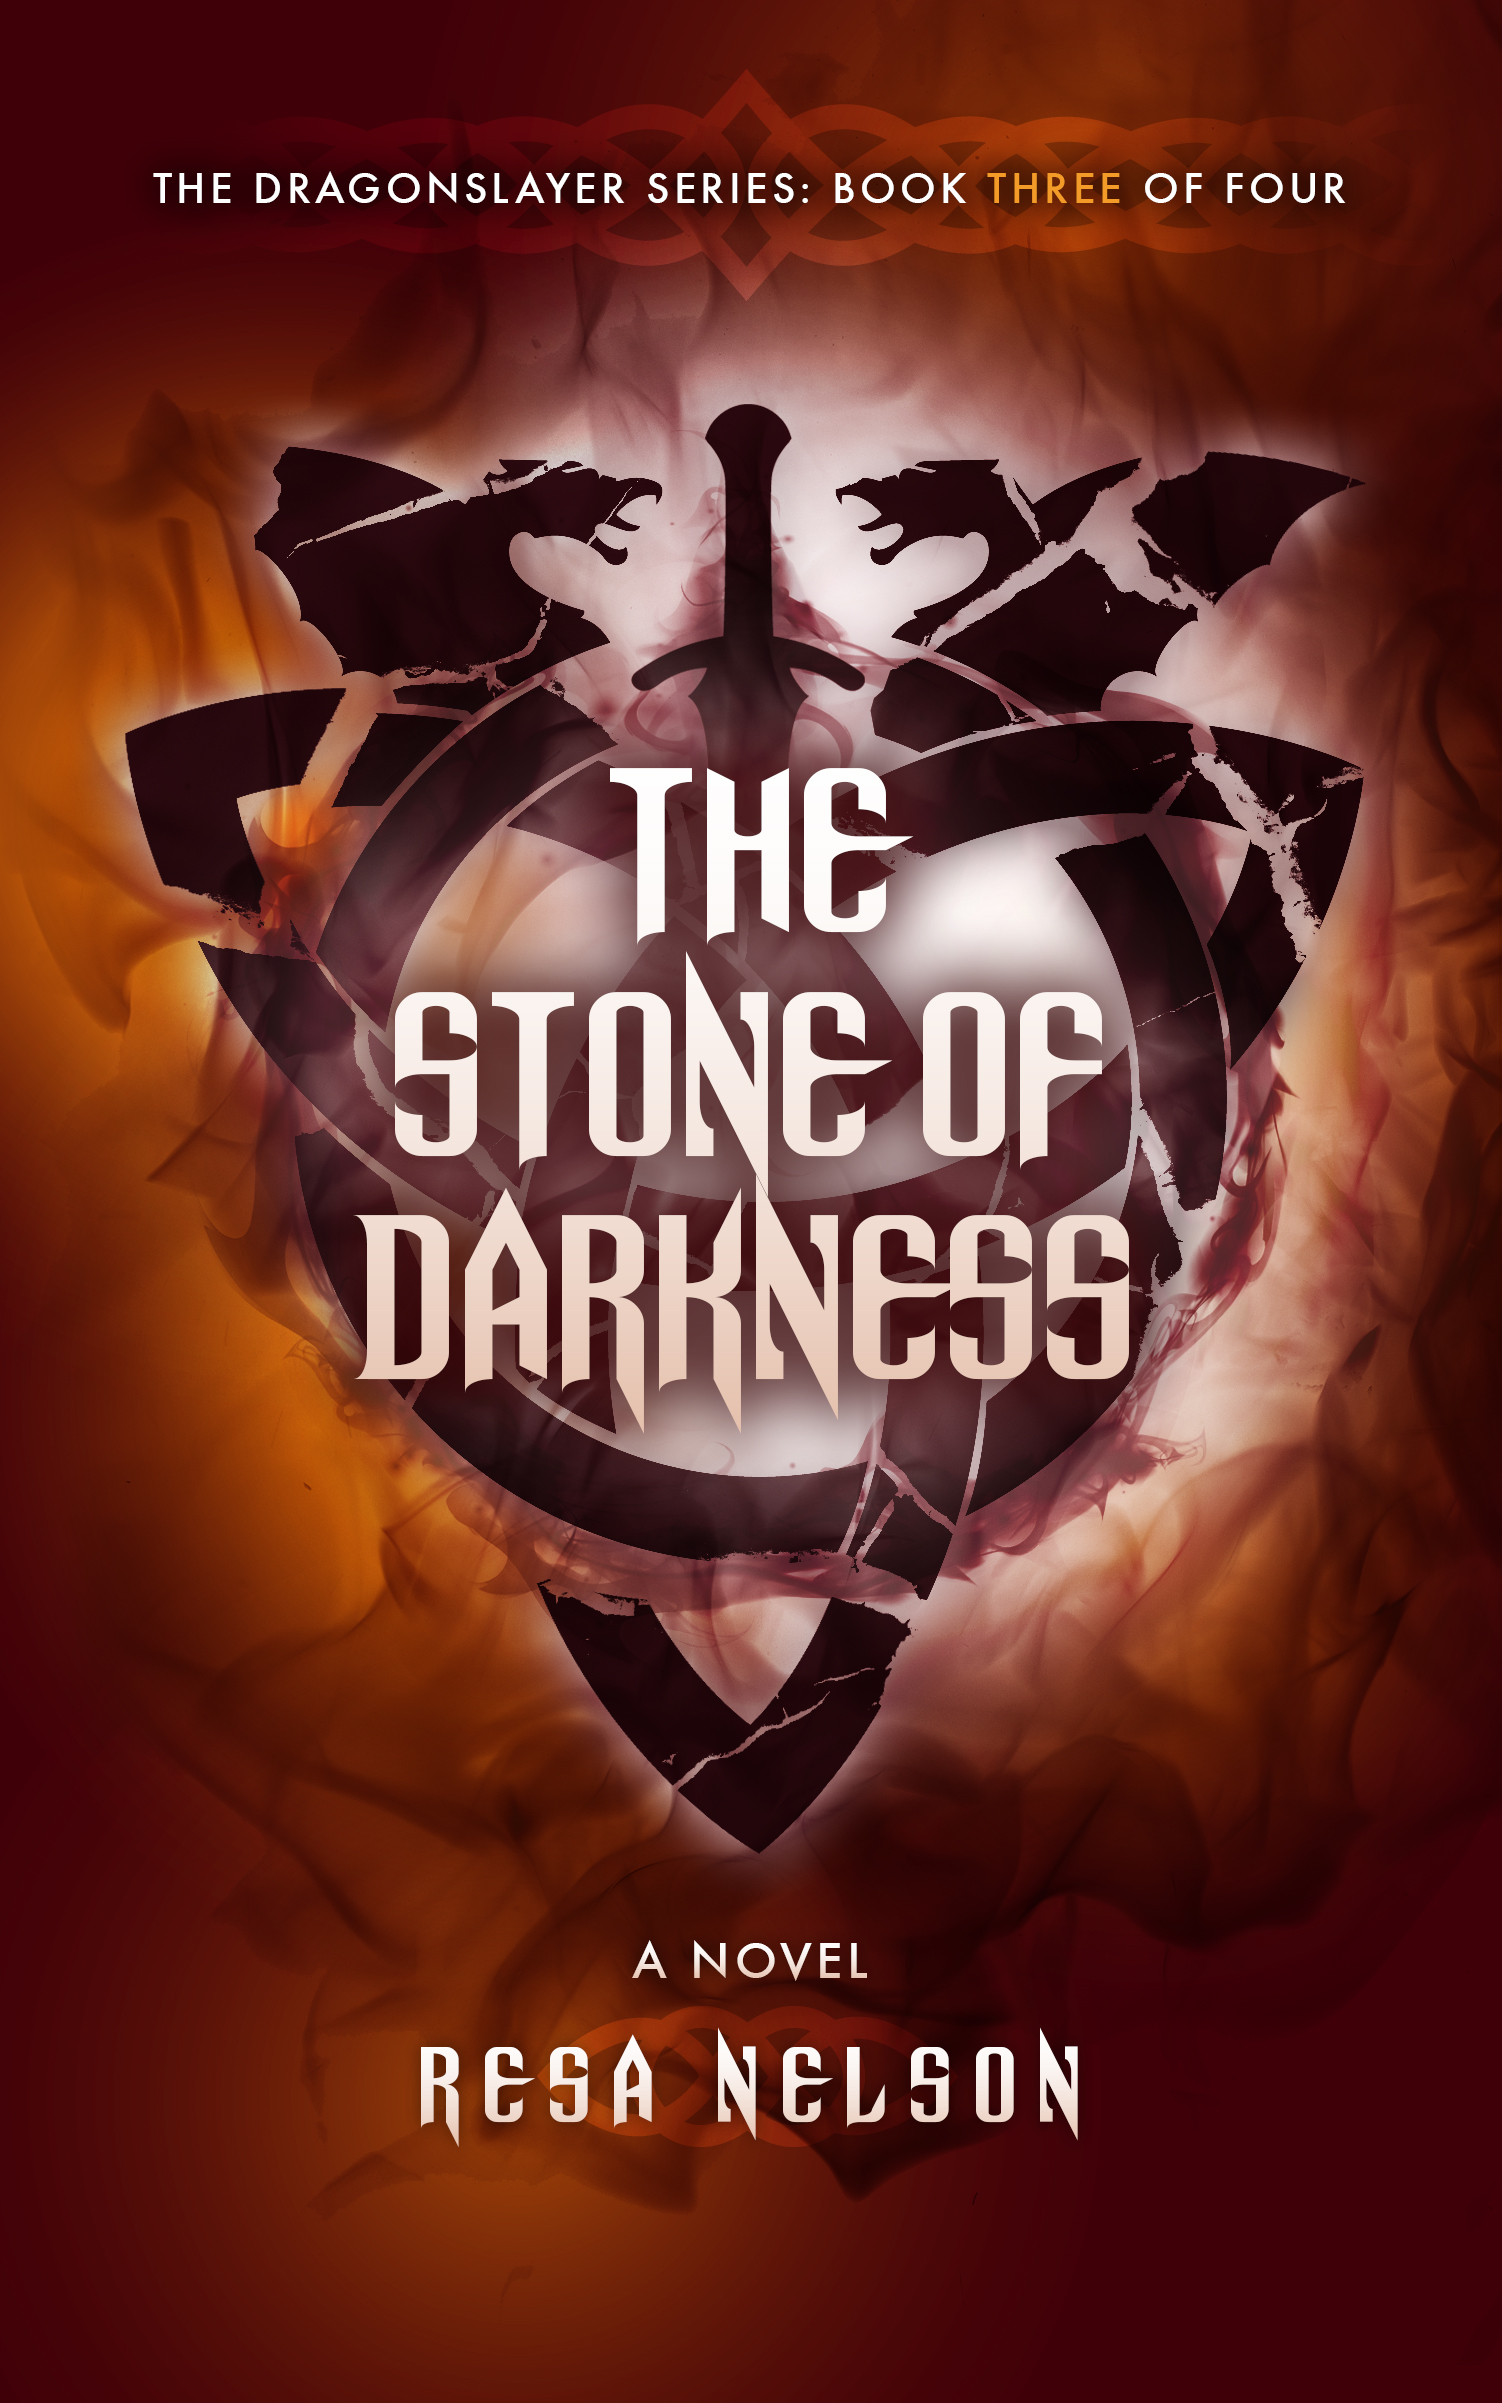 TheStoneofDarkness book cover